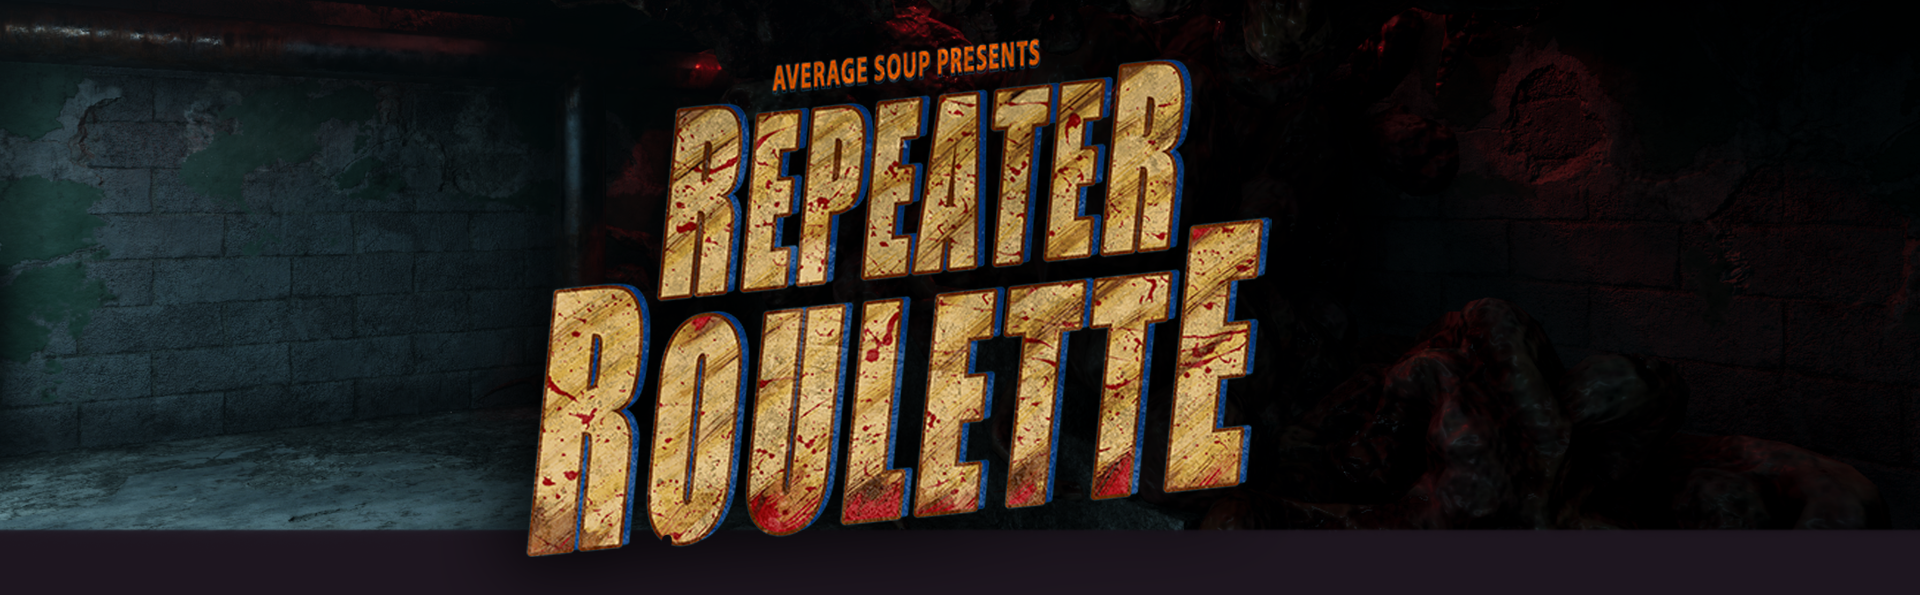 Repeater Roulette